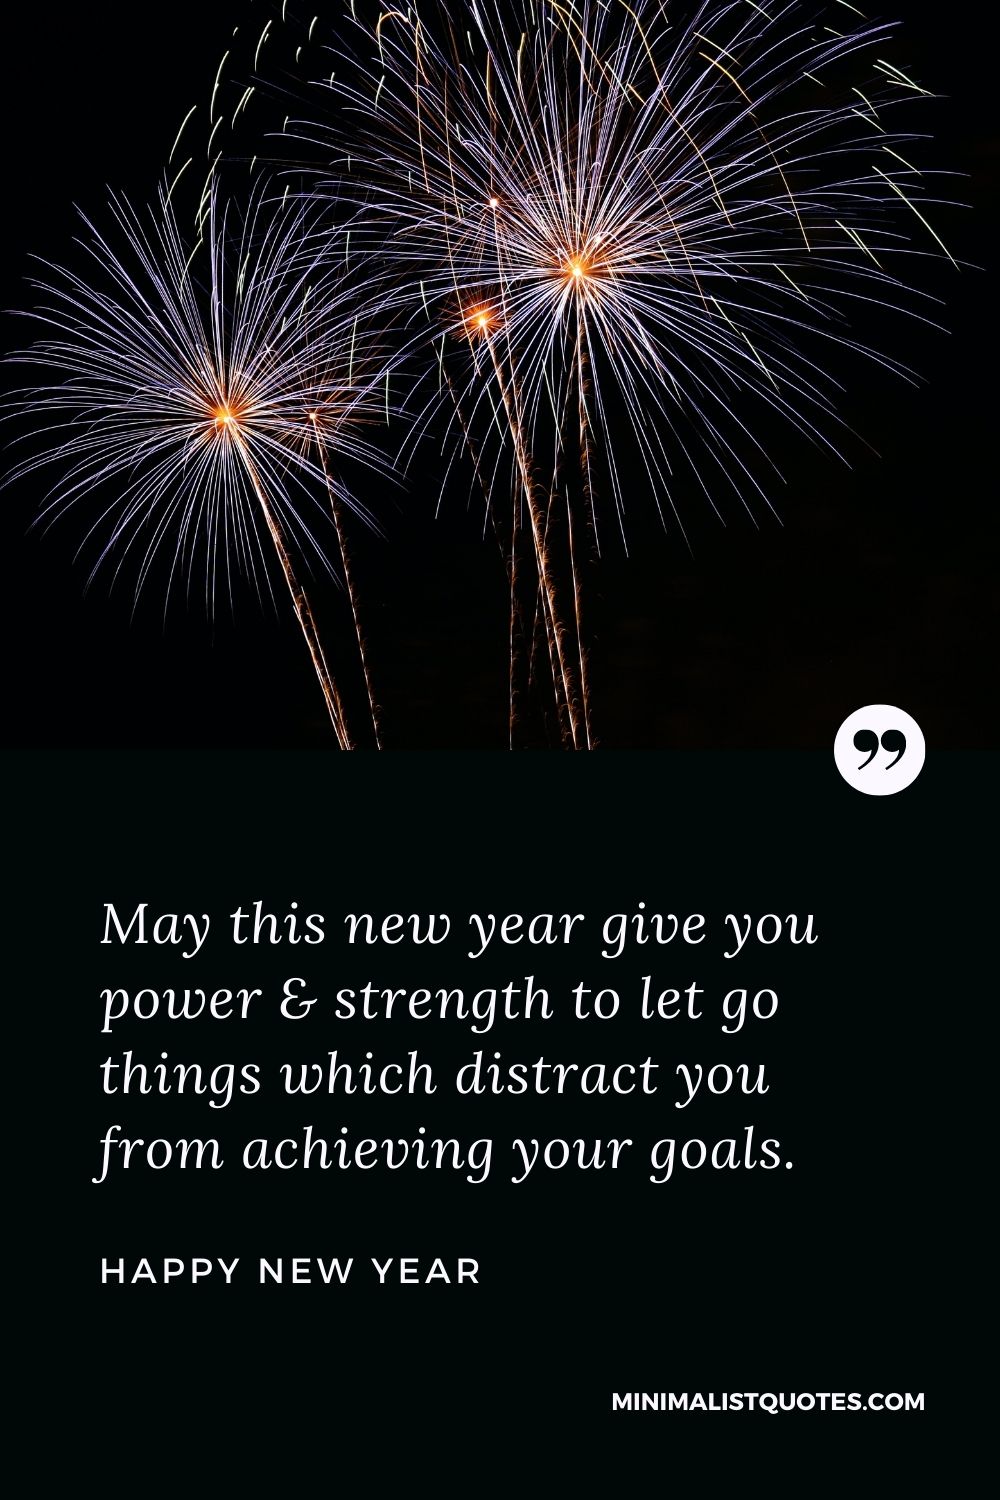 New Year Wish - May this new year give you power & strength to let go things which distract you from achieving your goals.